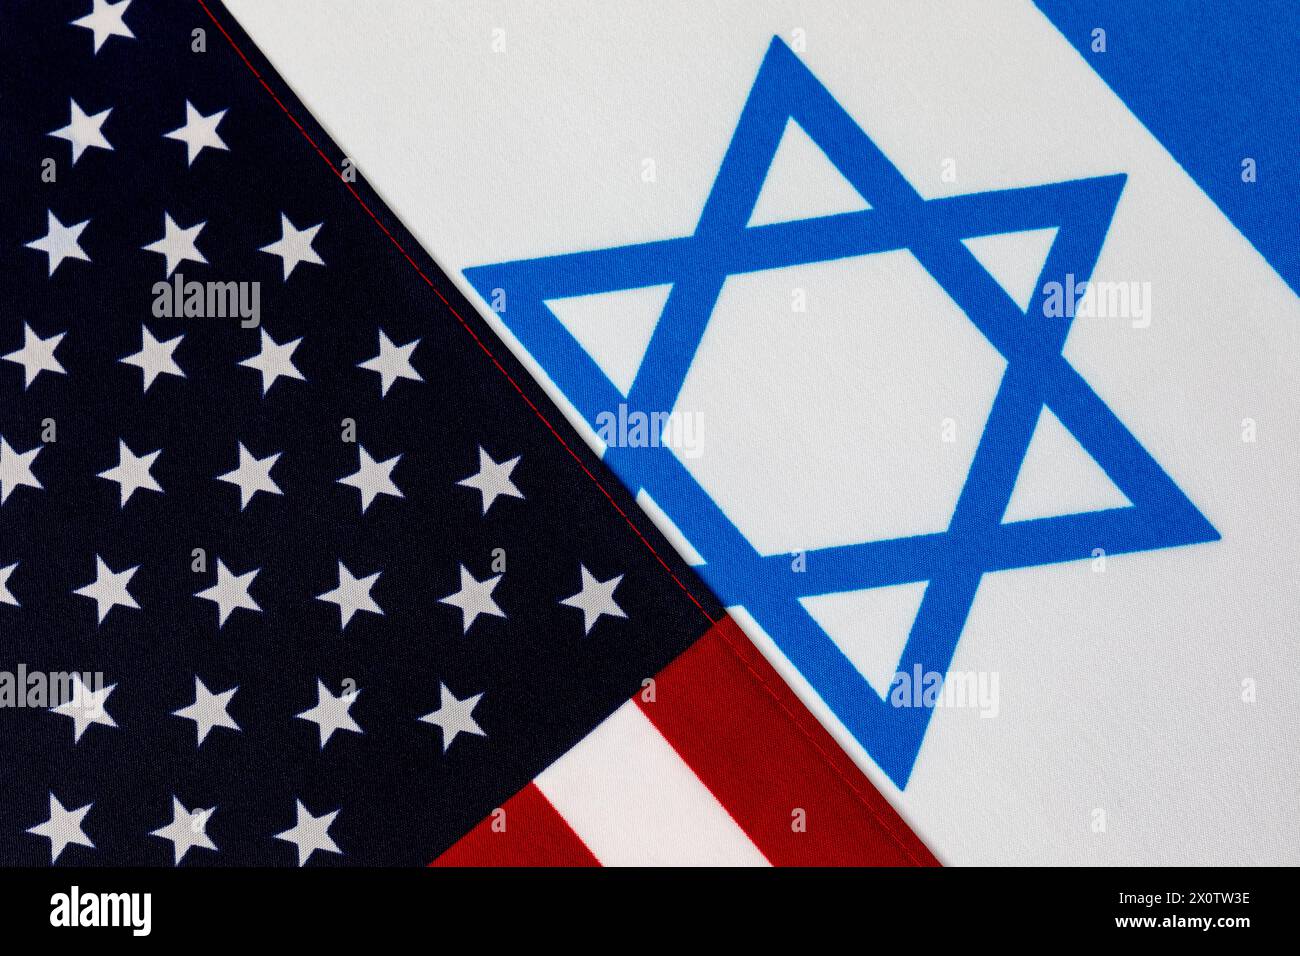 United States of America and Israel flags. Israel war financial support, foreign aid funding and government relations concept. Stock Photo